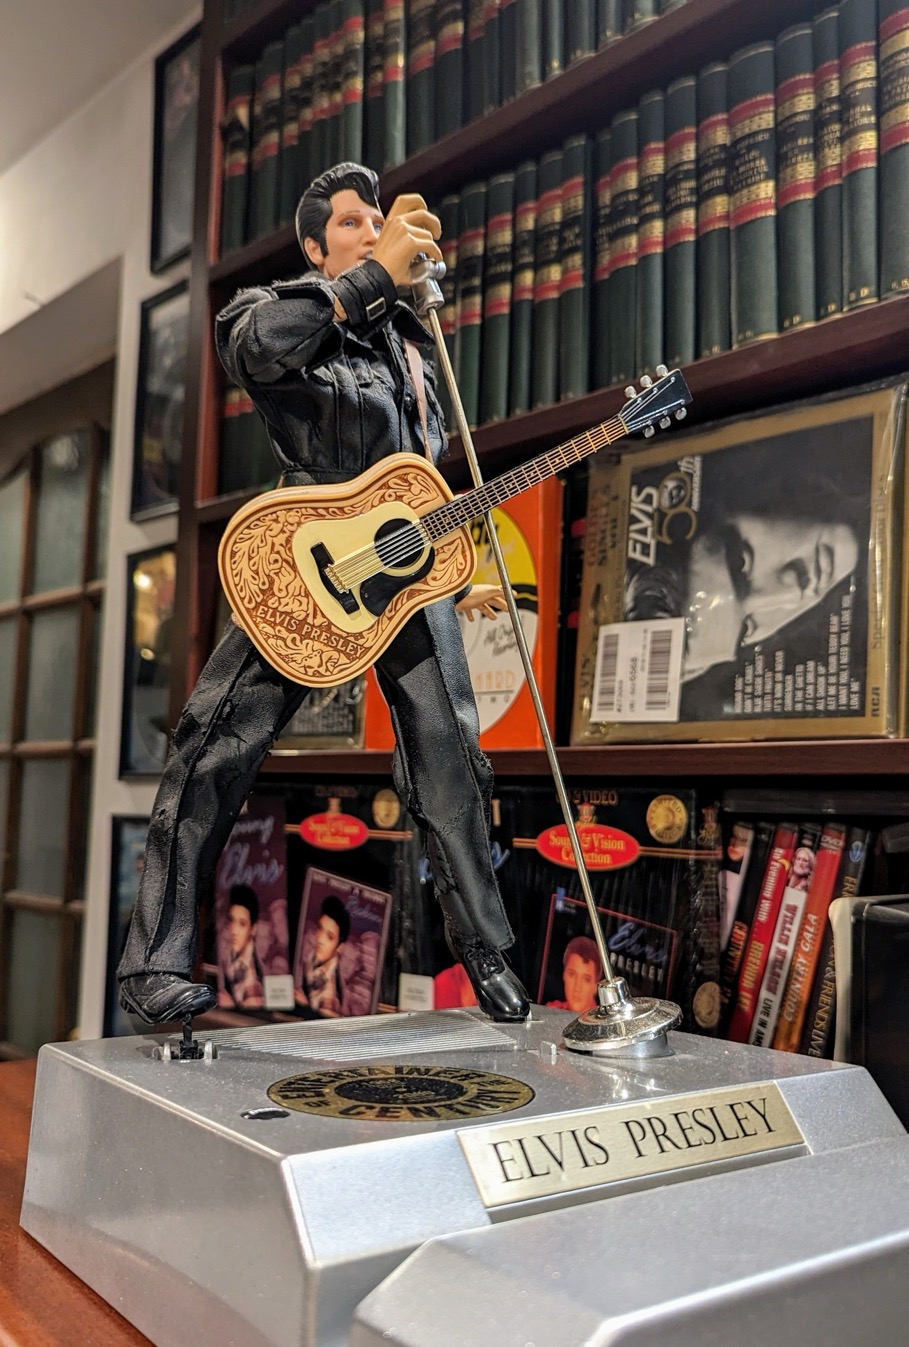 A statue of a person holding a guitar

Description automatically generated